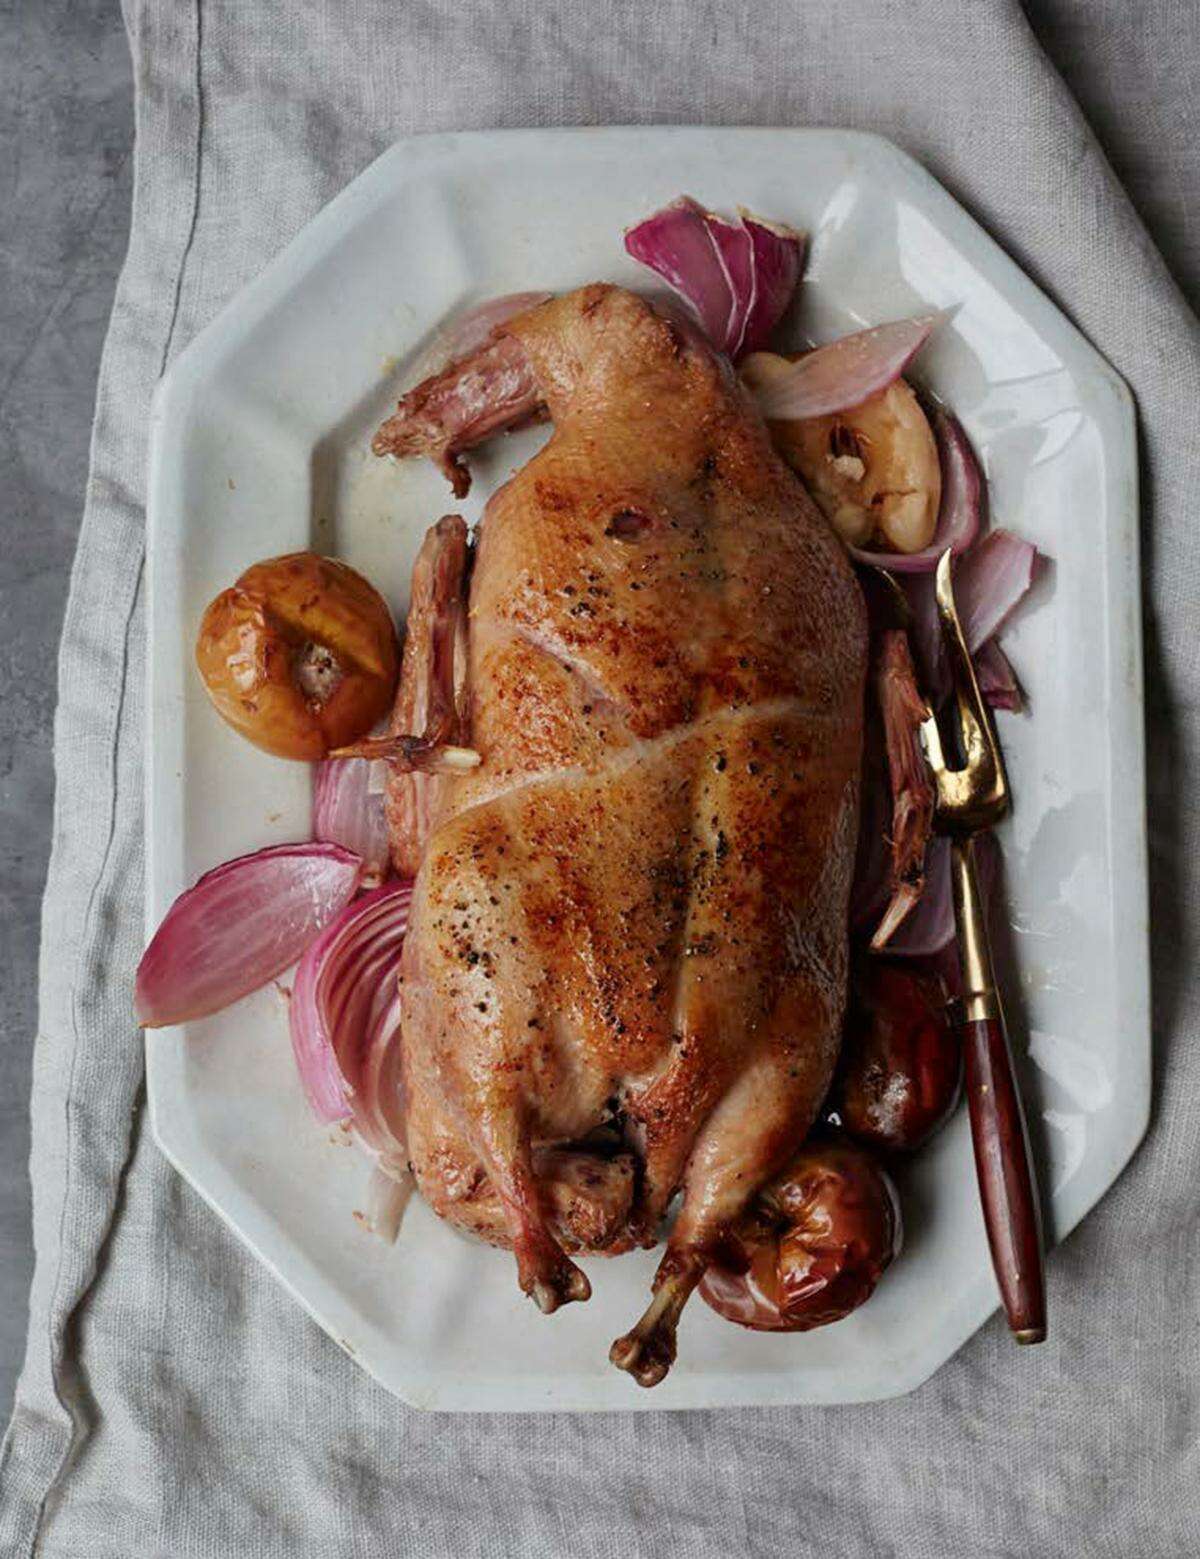 Alsatian roasted goose is a recipe featured in the book The Gifelte Manifesto by Jeffrey Yoskowitz and Lis Alpern.